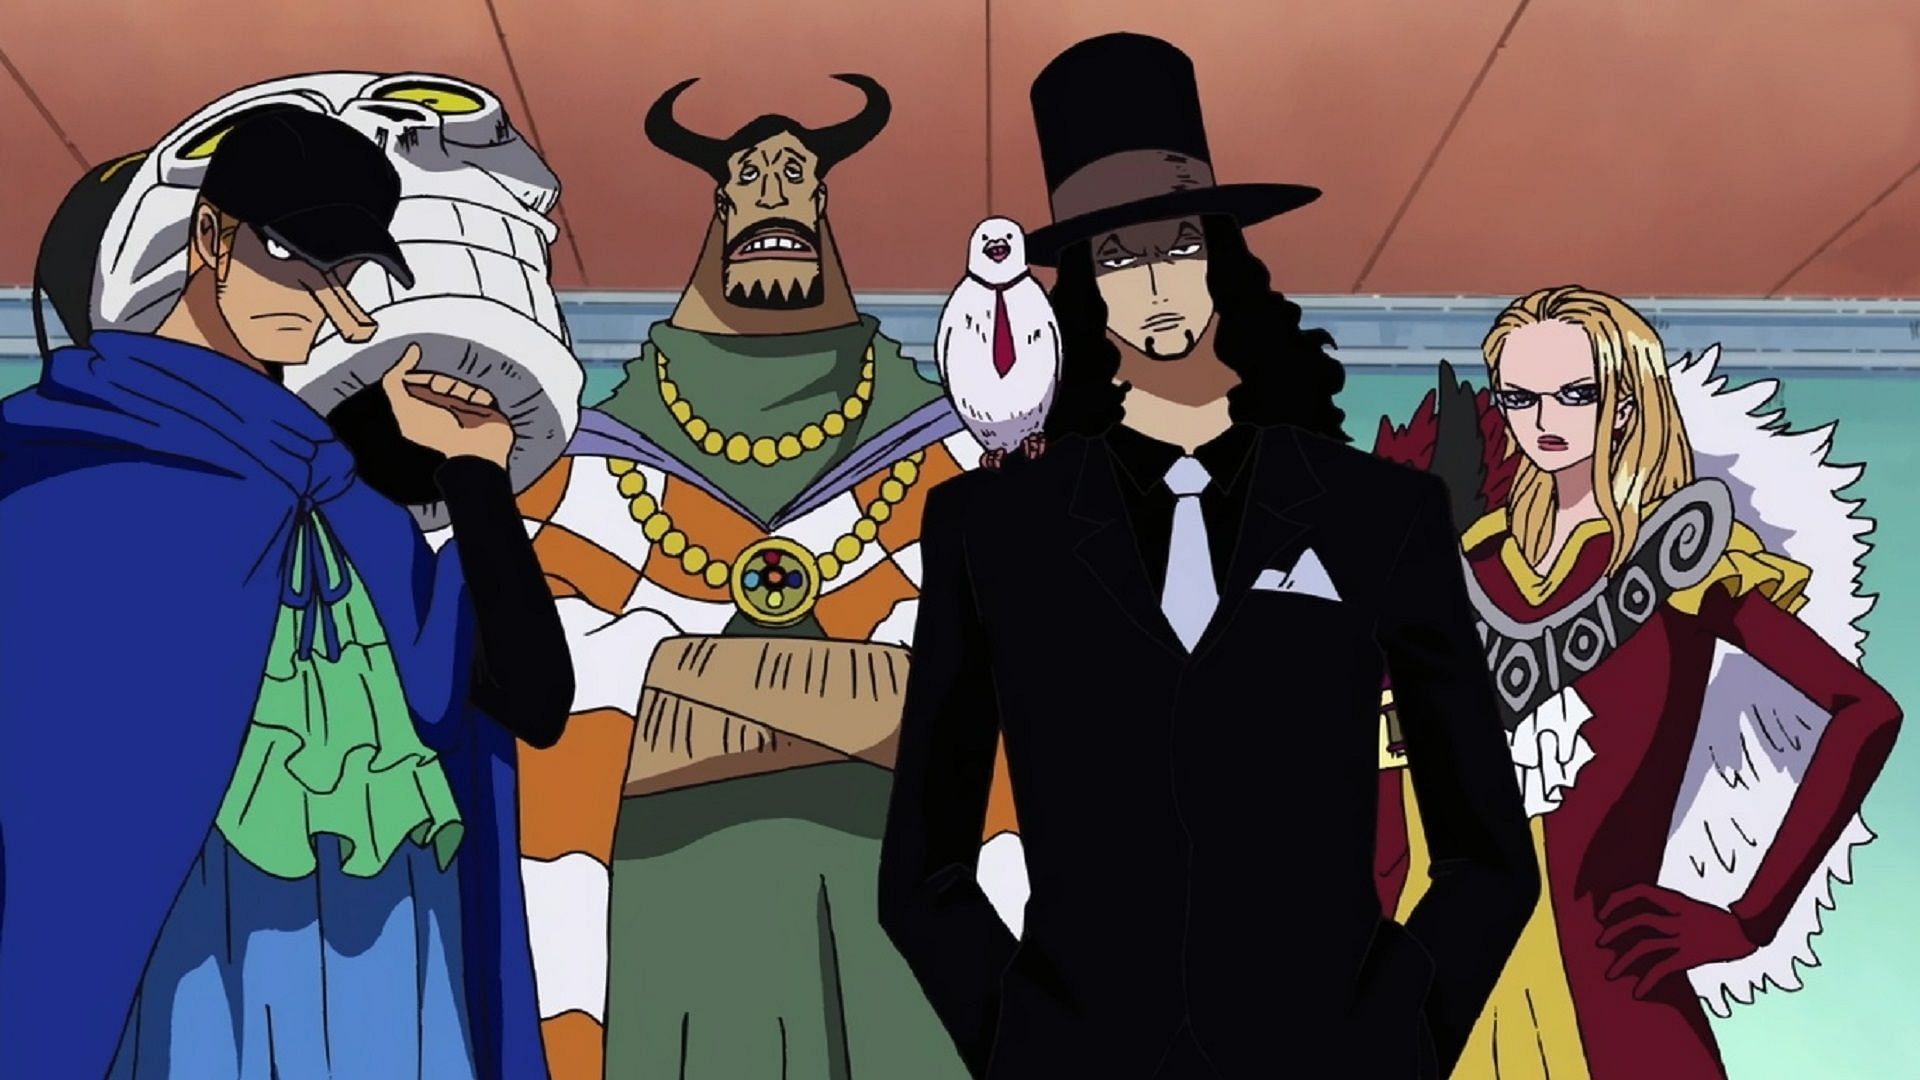 Fukuro, a CP9 agent, measured the basic physical capabilities of his colleagues through the Doriki (Image via Toei Animation, One Piece)